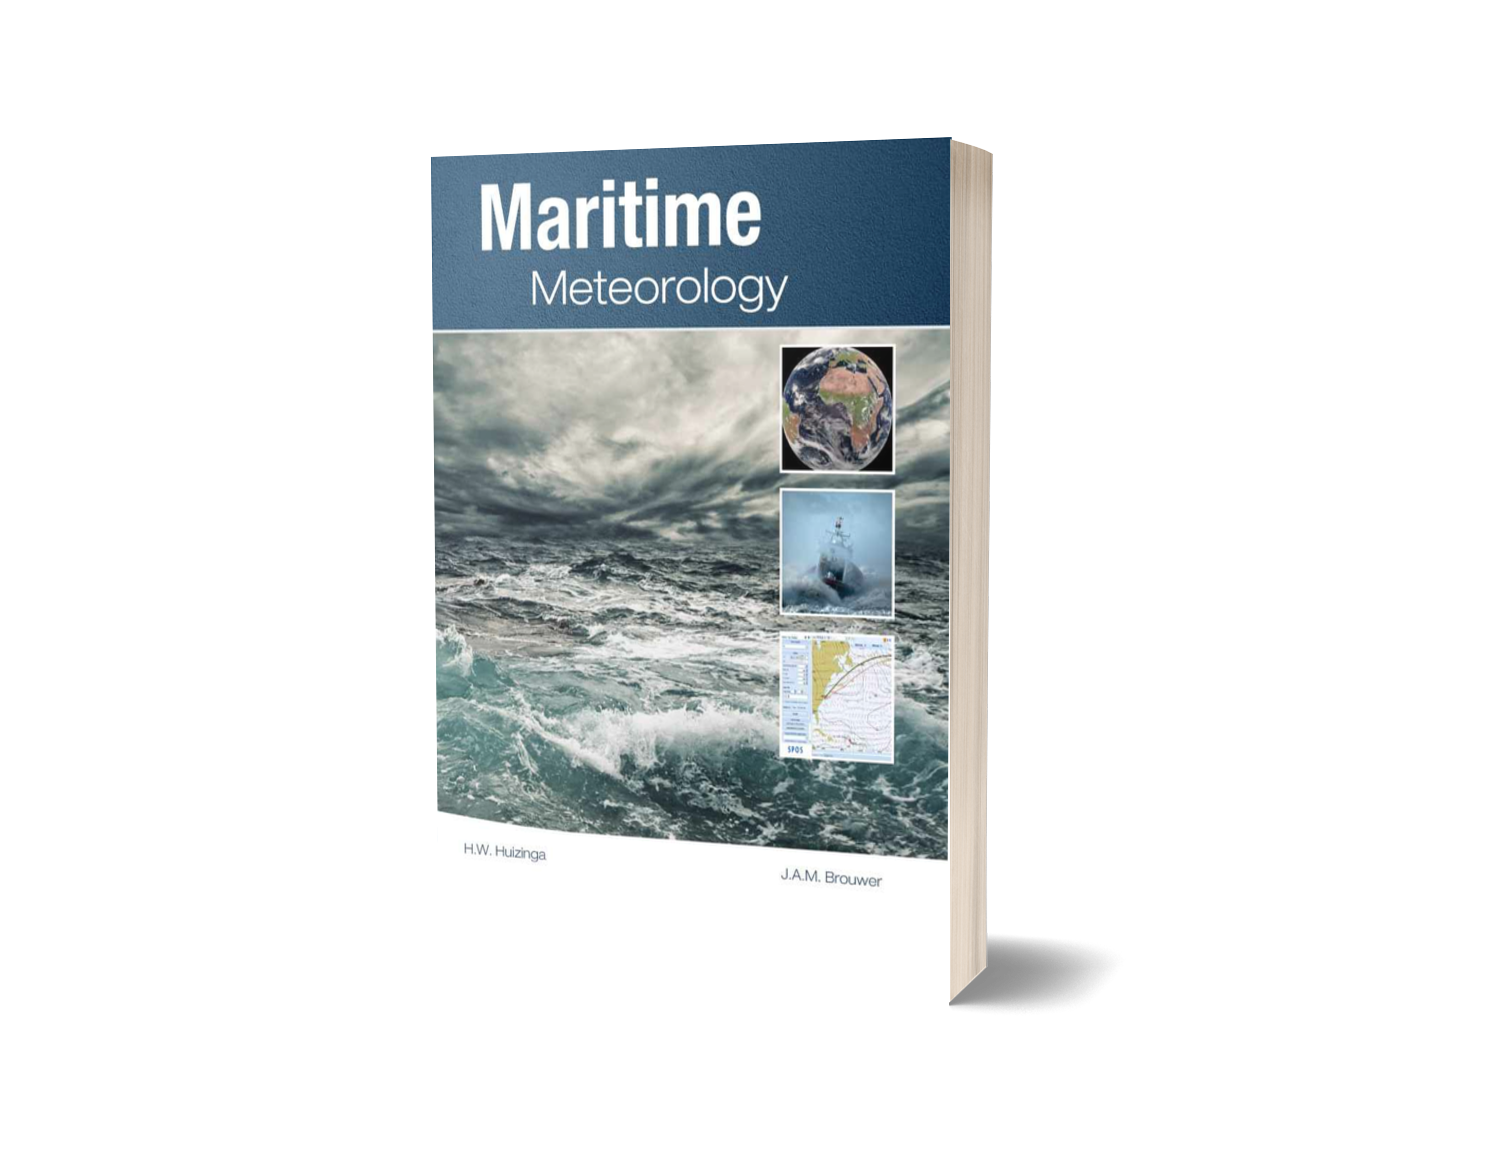 New Book "Maritime Meteorology" Now Available on Our Webshop